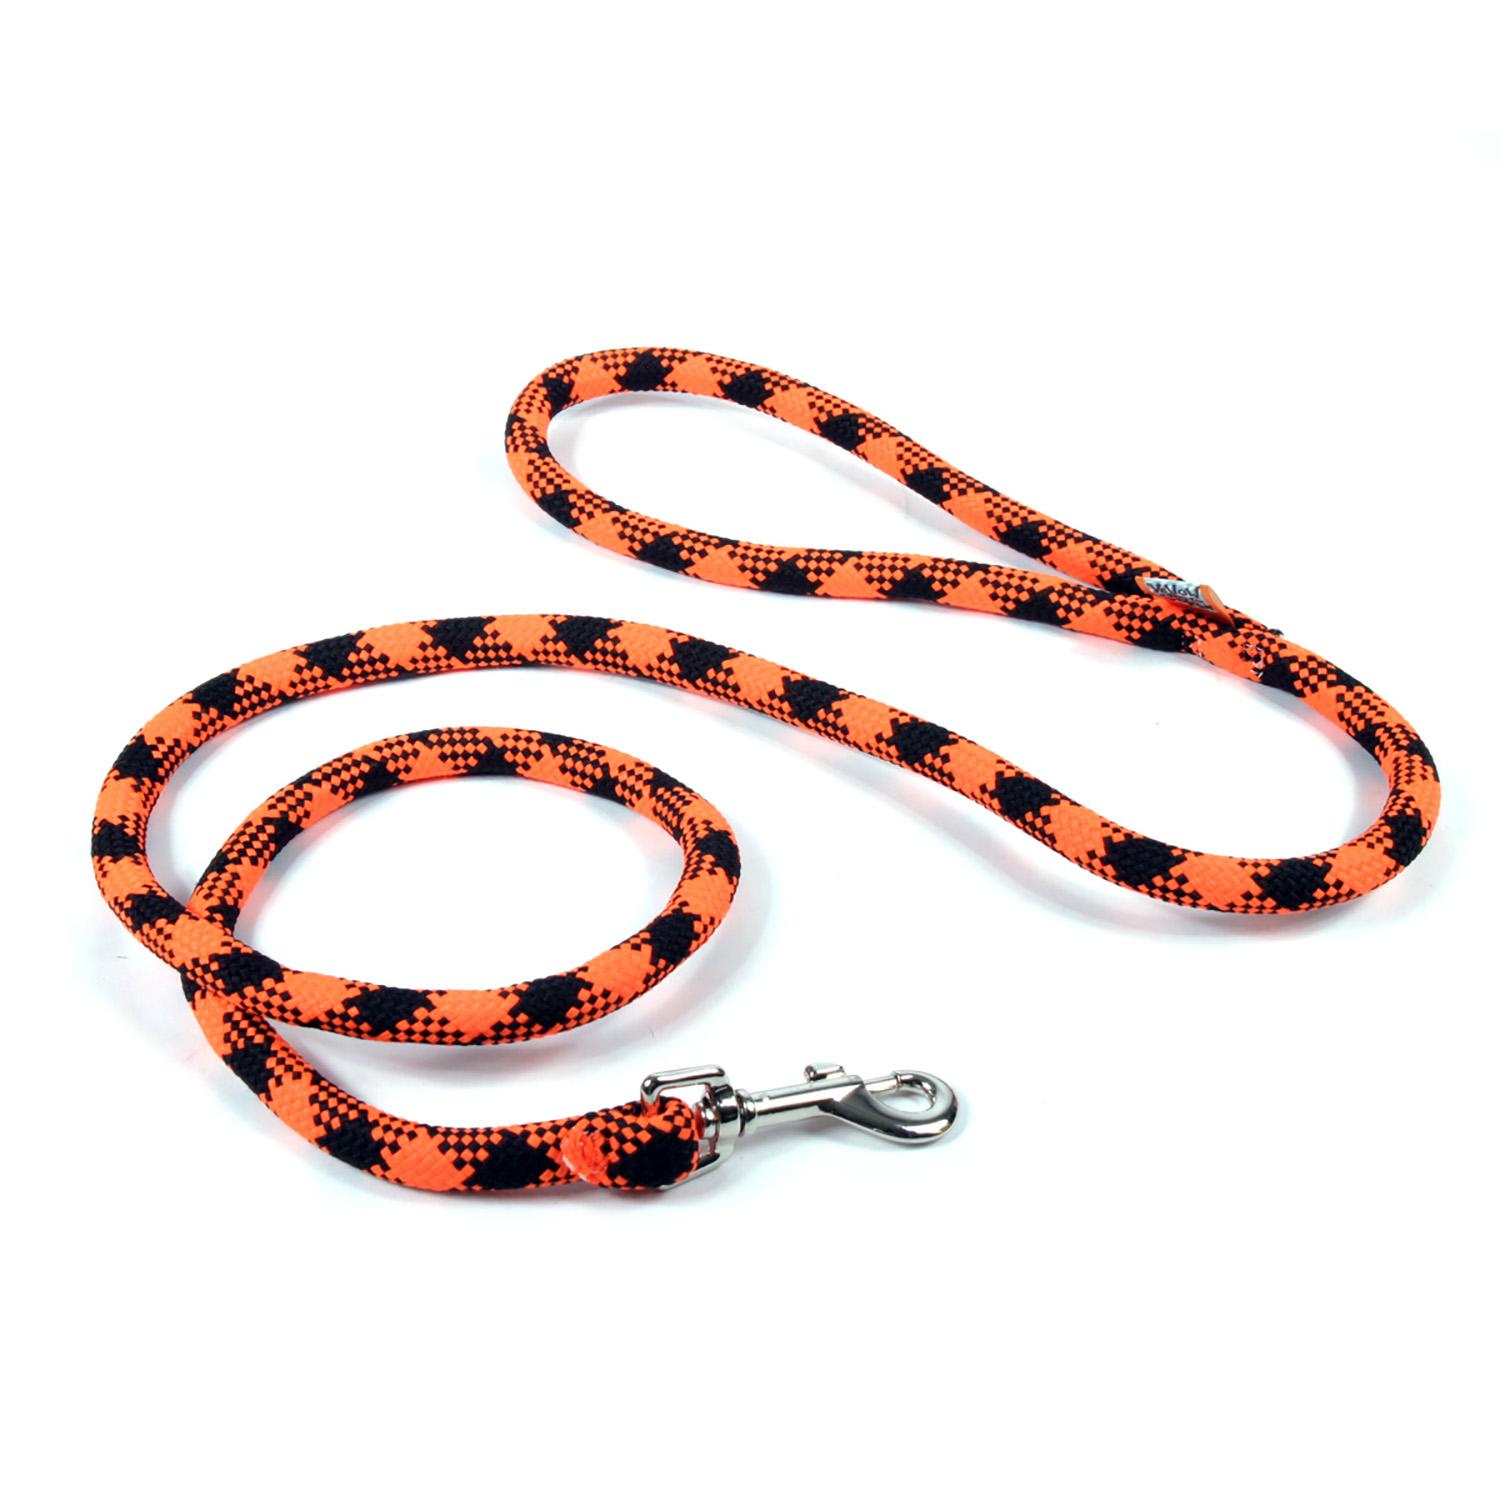 Round Braided Multicolor Dog Leash by 